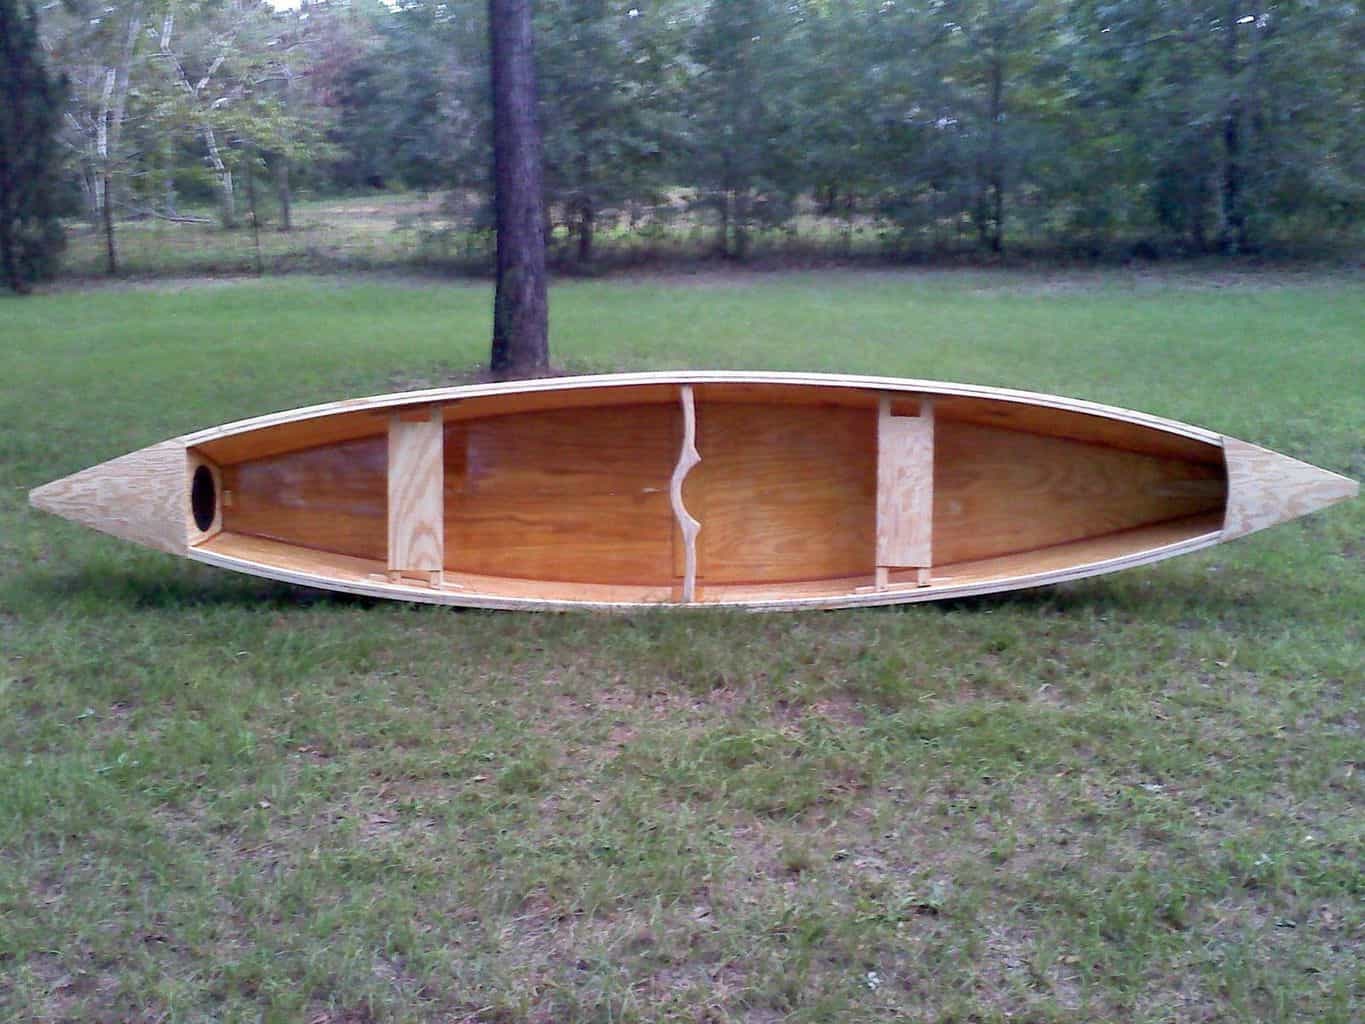 No reason for a simple plywood canoe to look ugly.